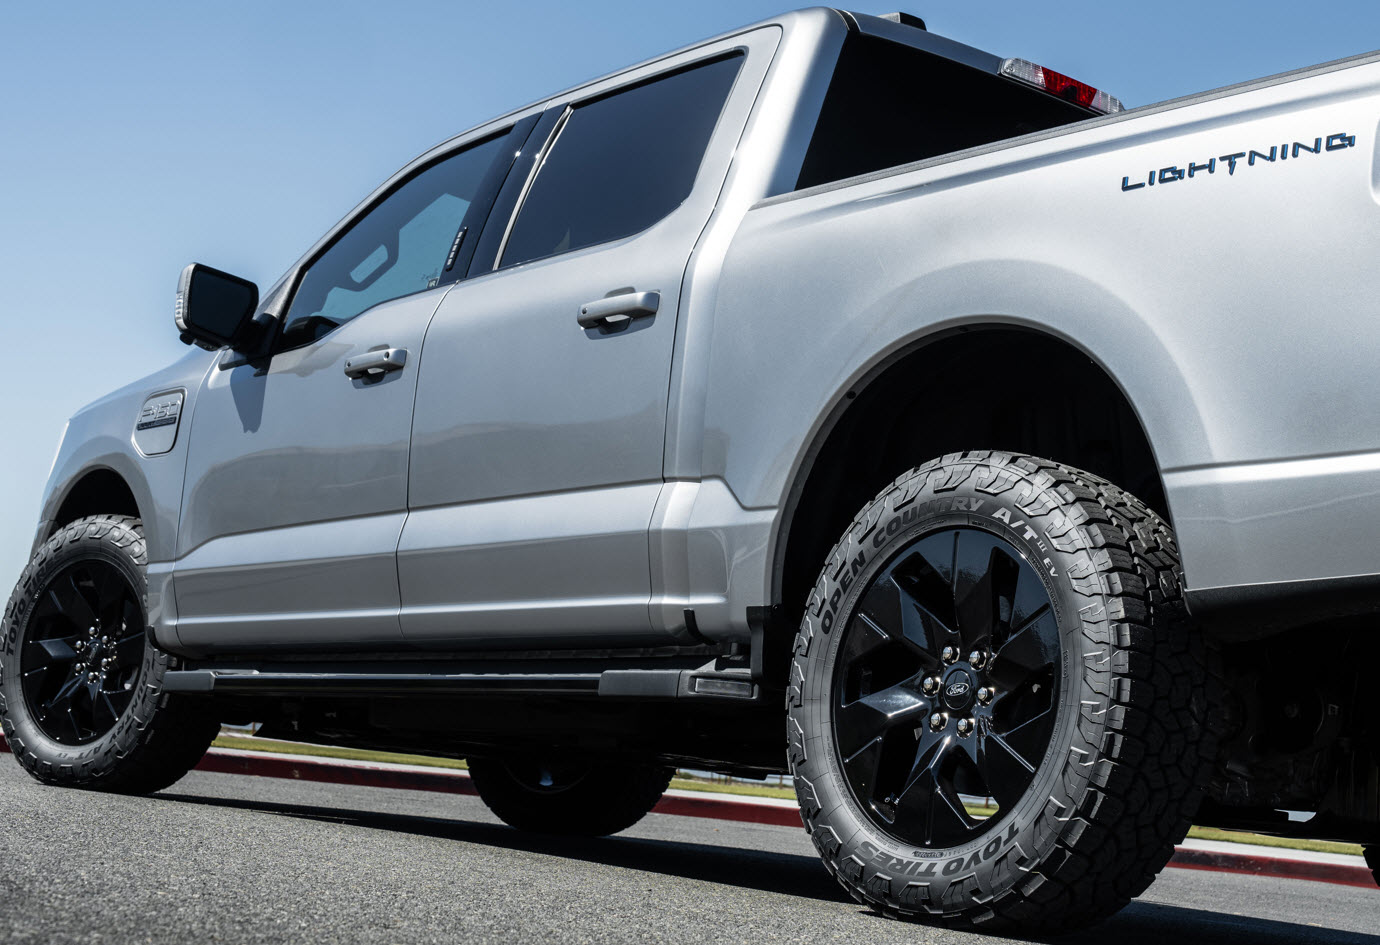 All-Terrain | Toyo Tire and Country Open The | EV for EV III Trucks SUVs. Tires A/T